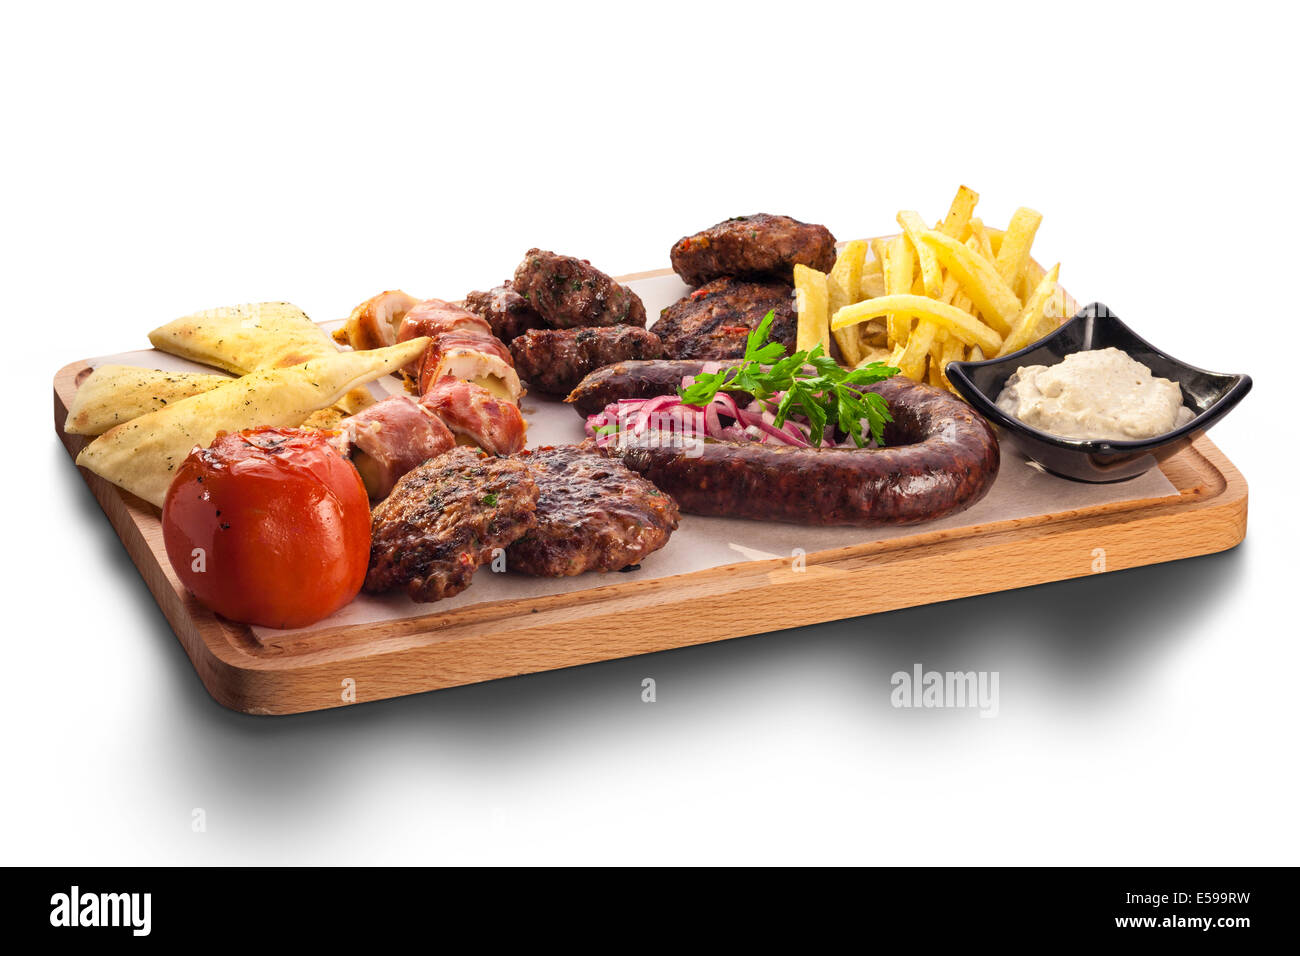 Wholesome platter of mixed meats including grilled steak, nachos, crispy crumbed chicken and beef on a bed of fresh leafy green Stock Photo